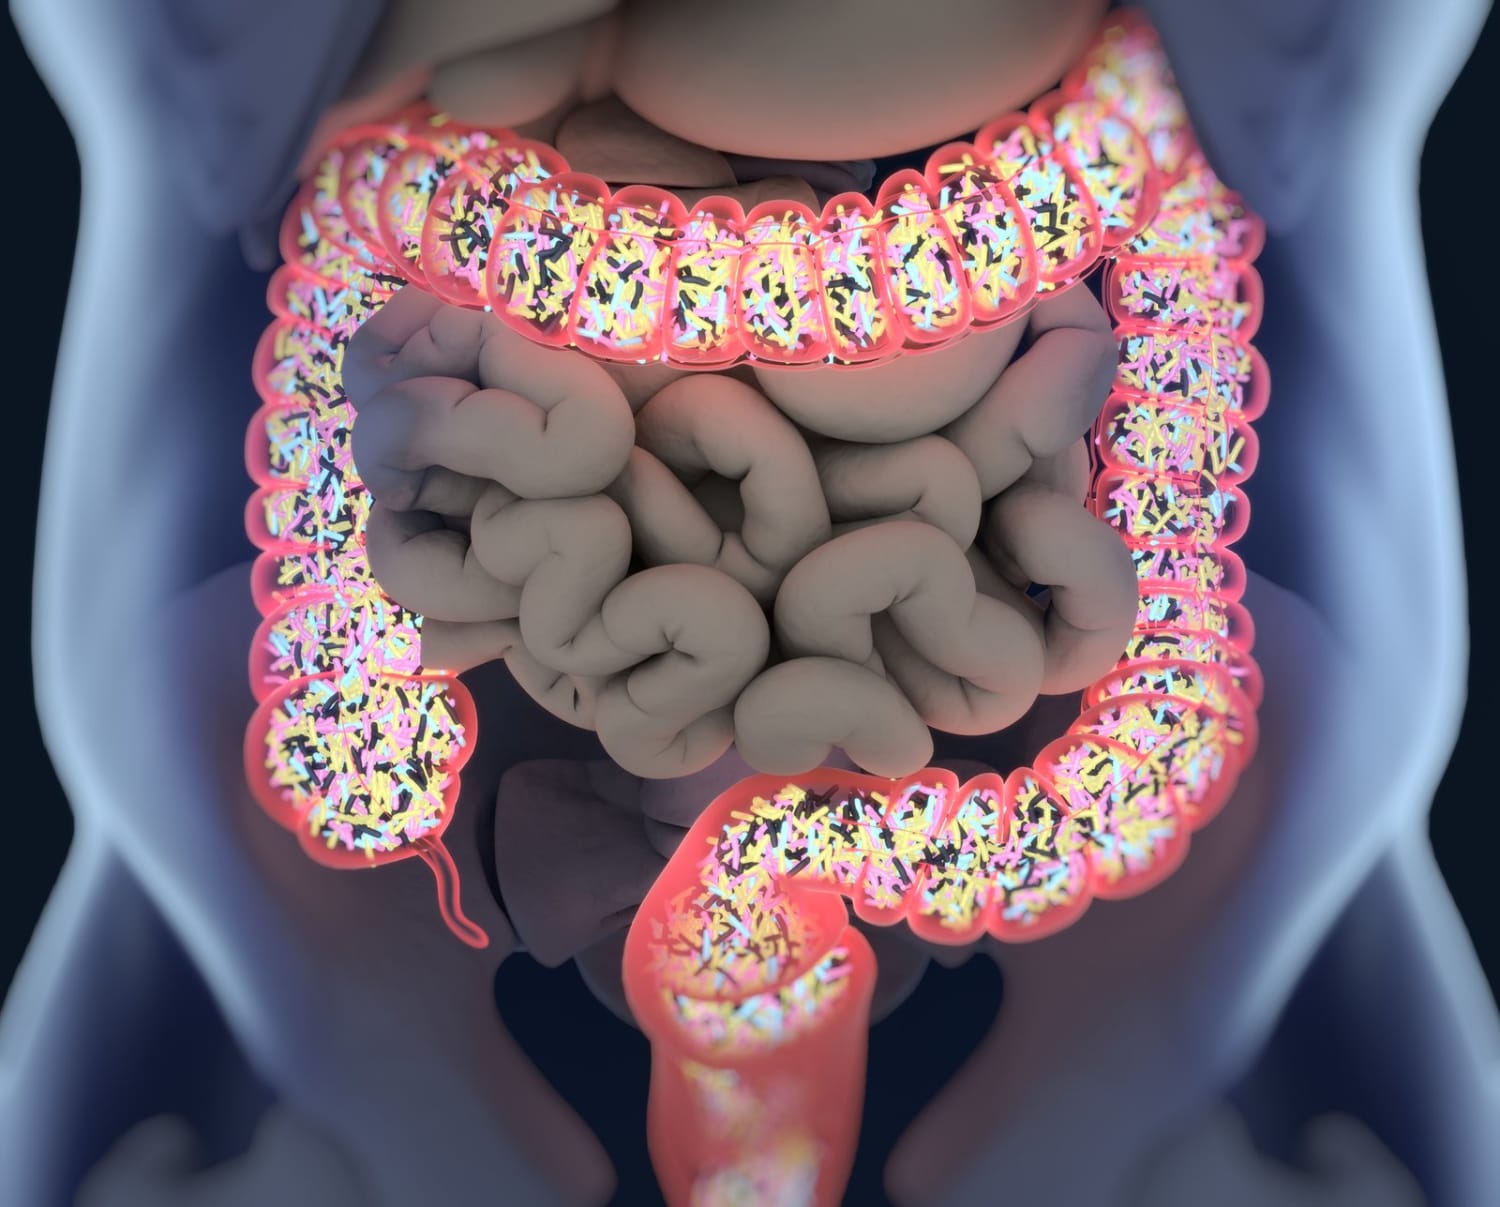 The Benefits of Probiotics Might Not Be So Clear Cut